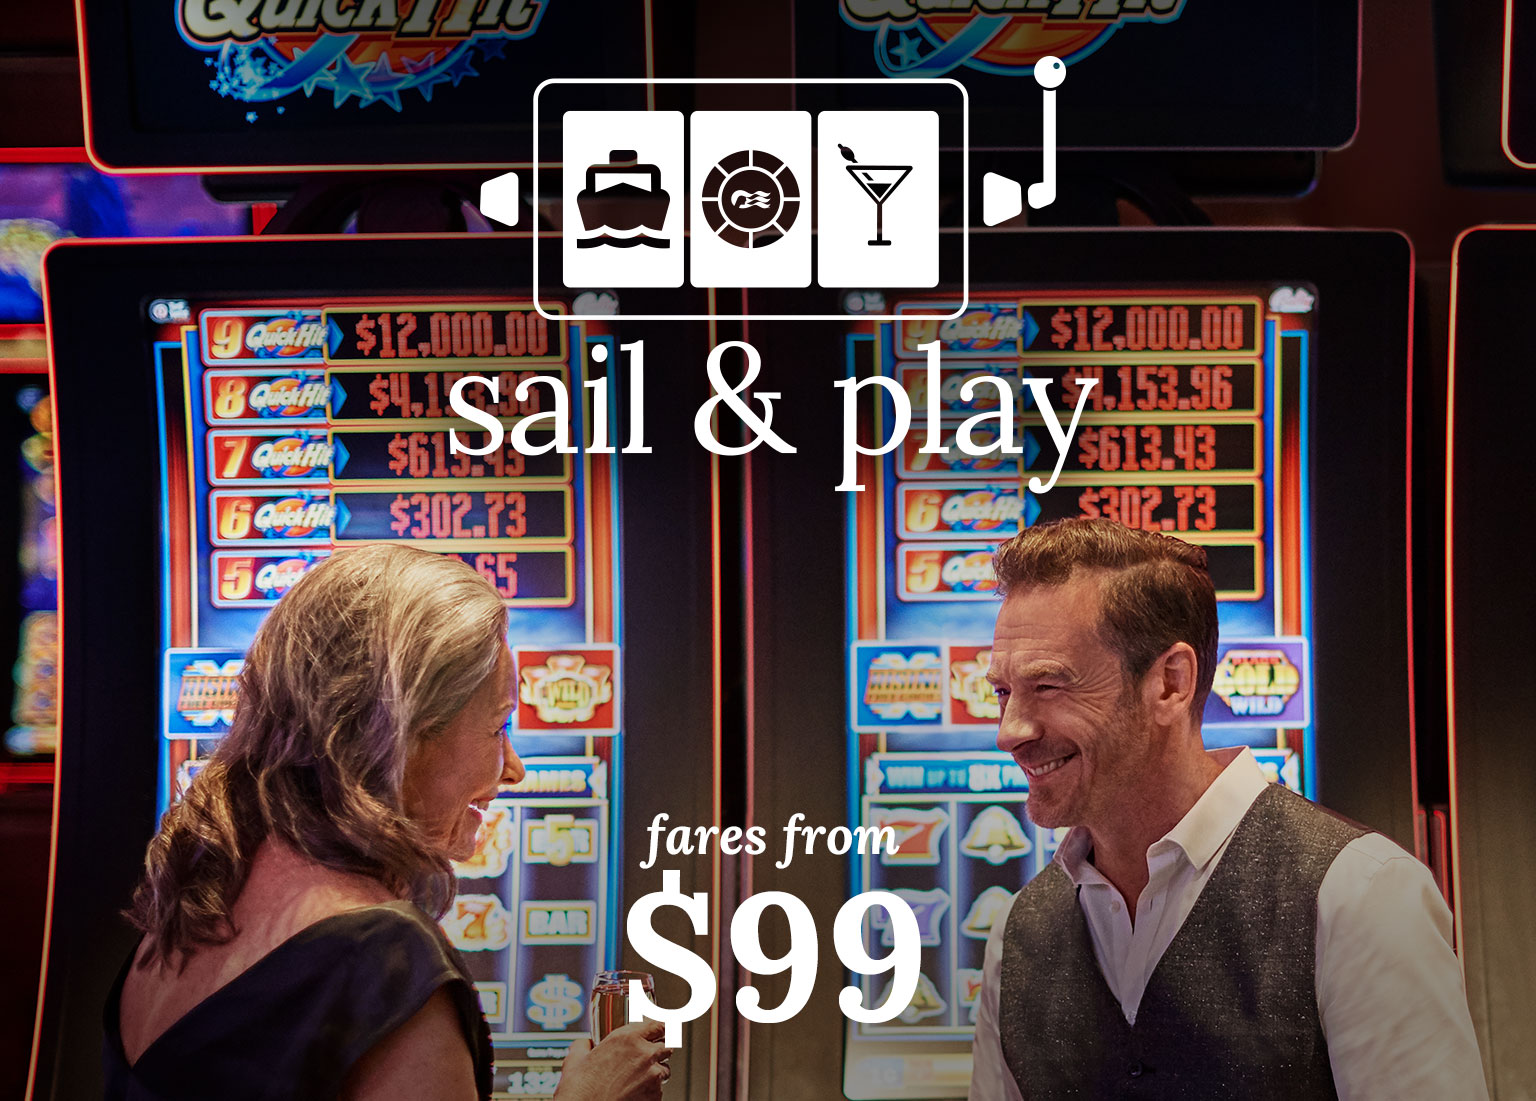 sail & play - fares from $99